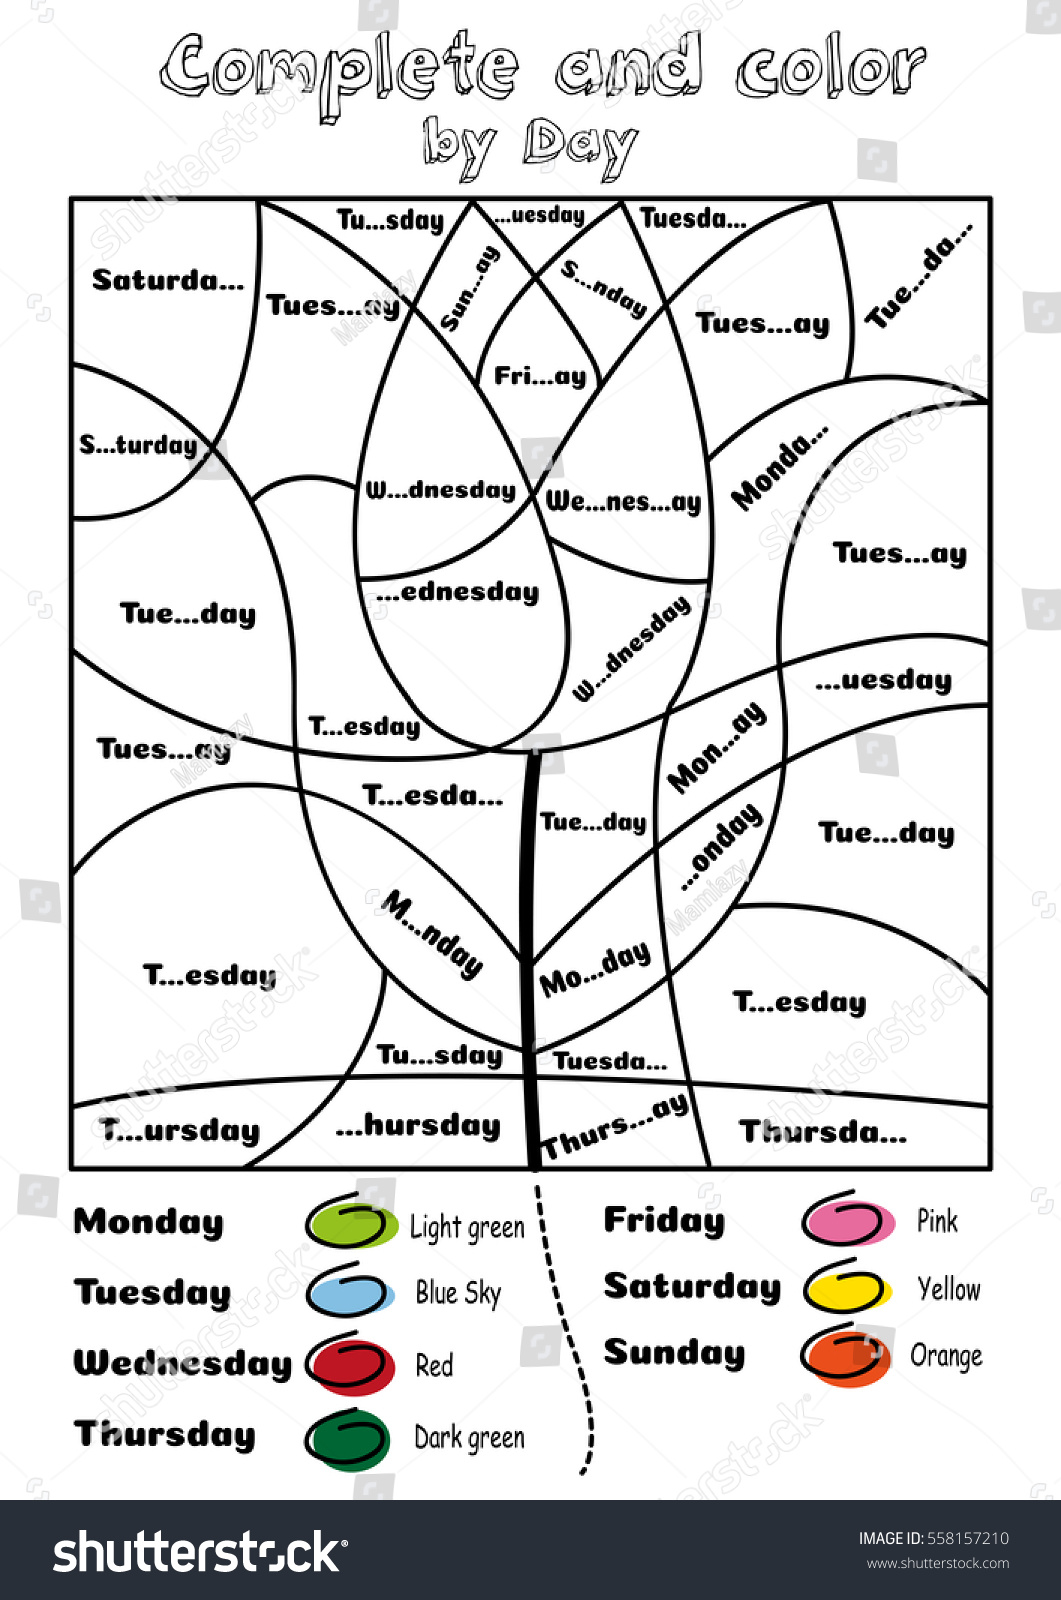 plete and color by days of the week Exercise Days of the week English kindergarten